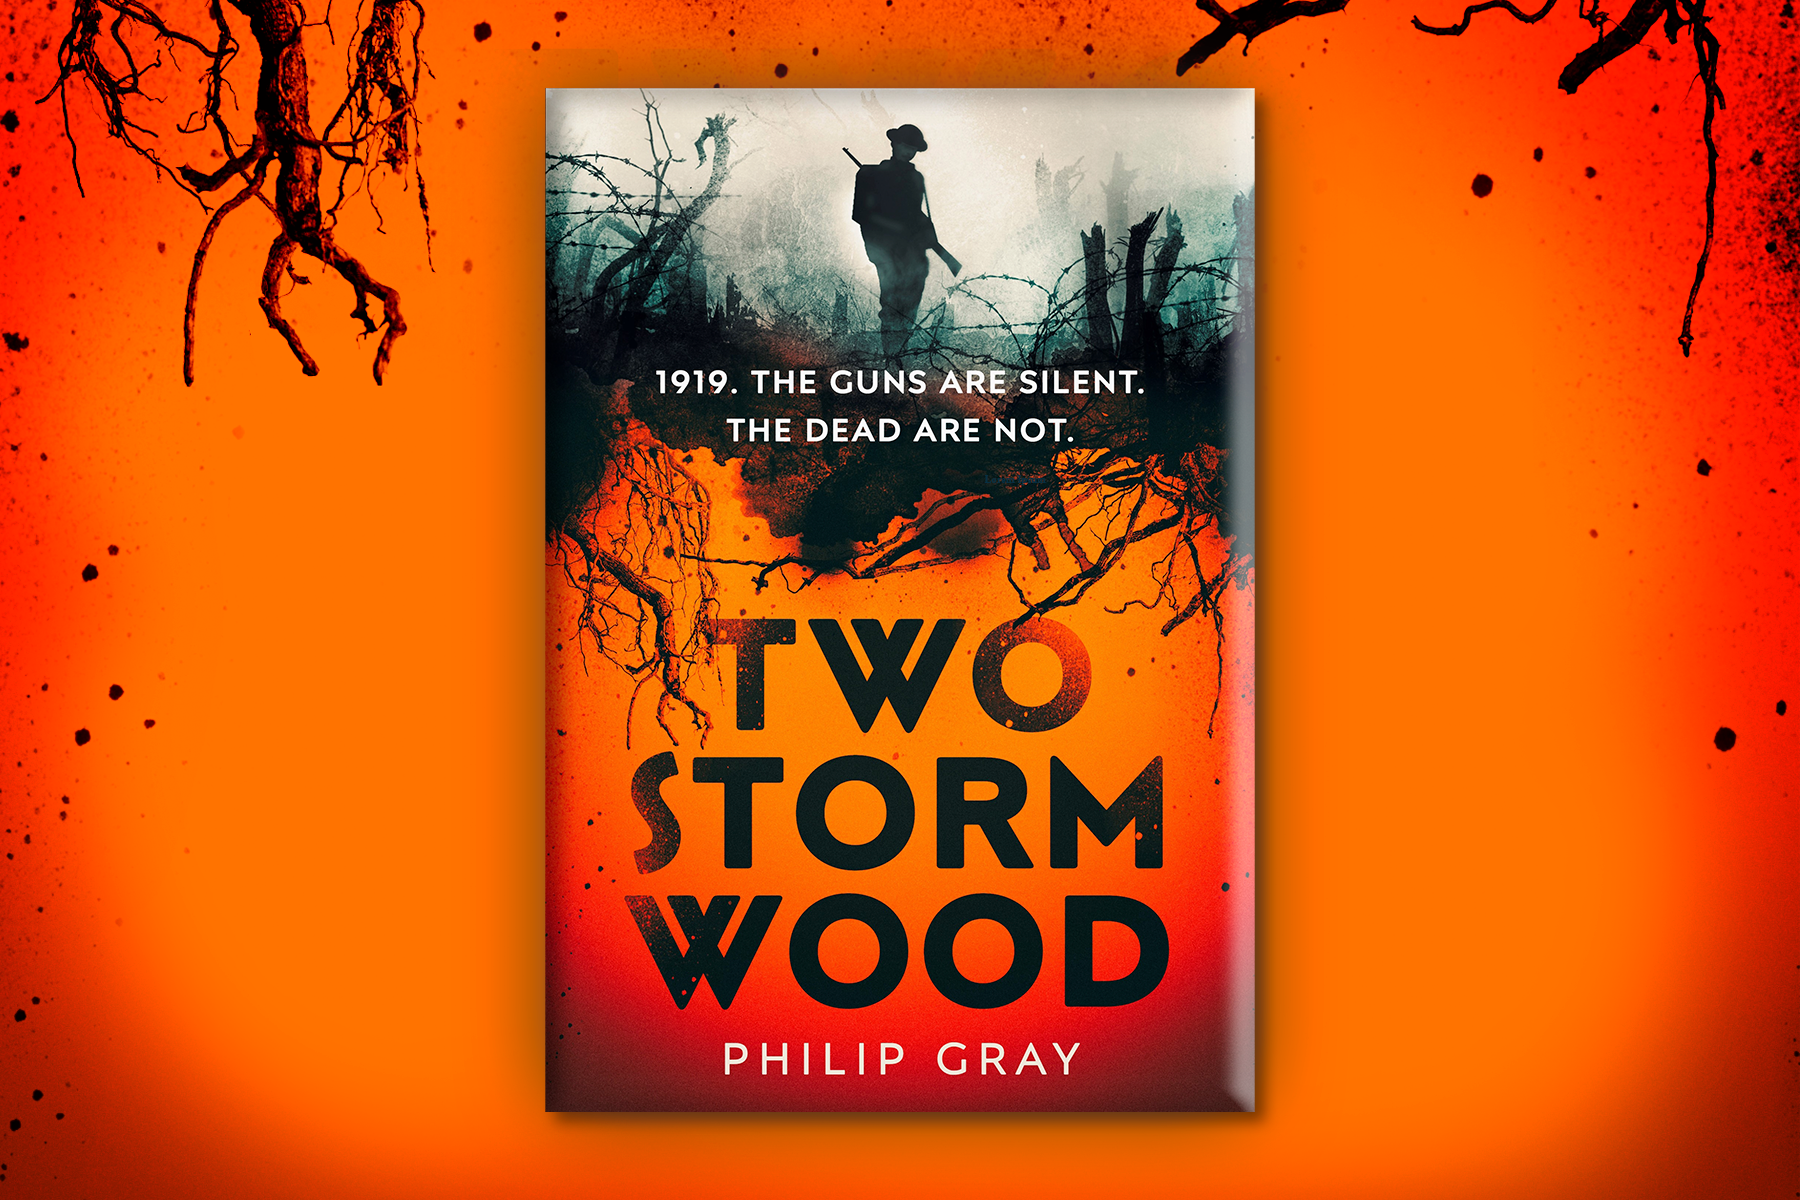 Two Storm Wood by Philip Gray